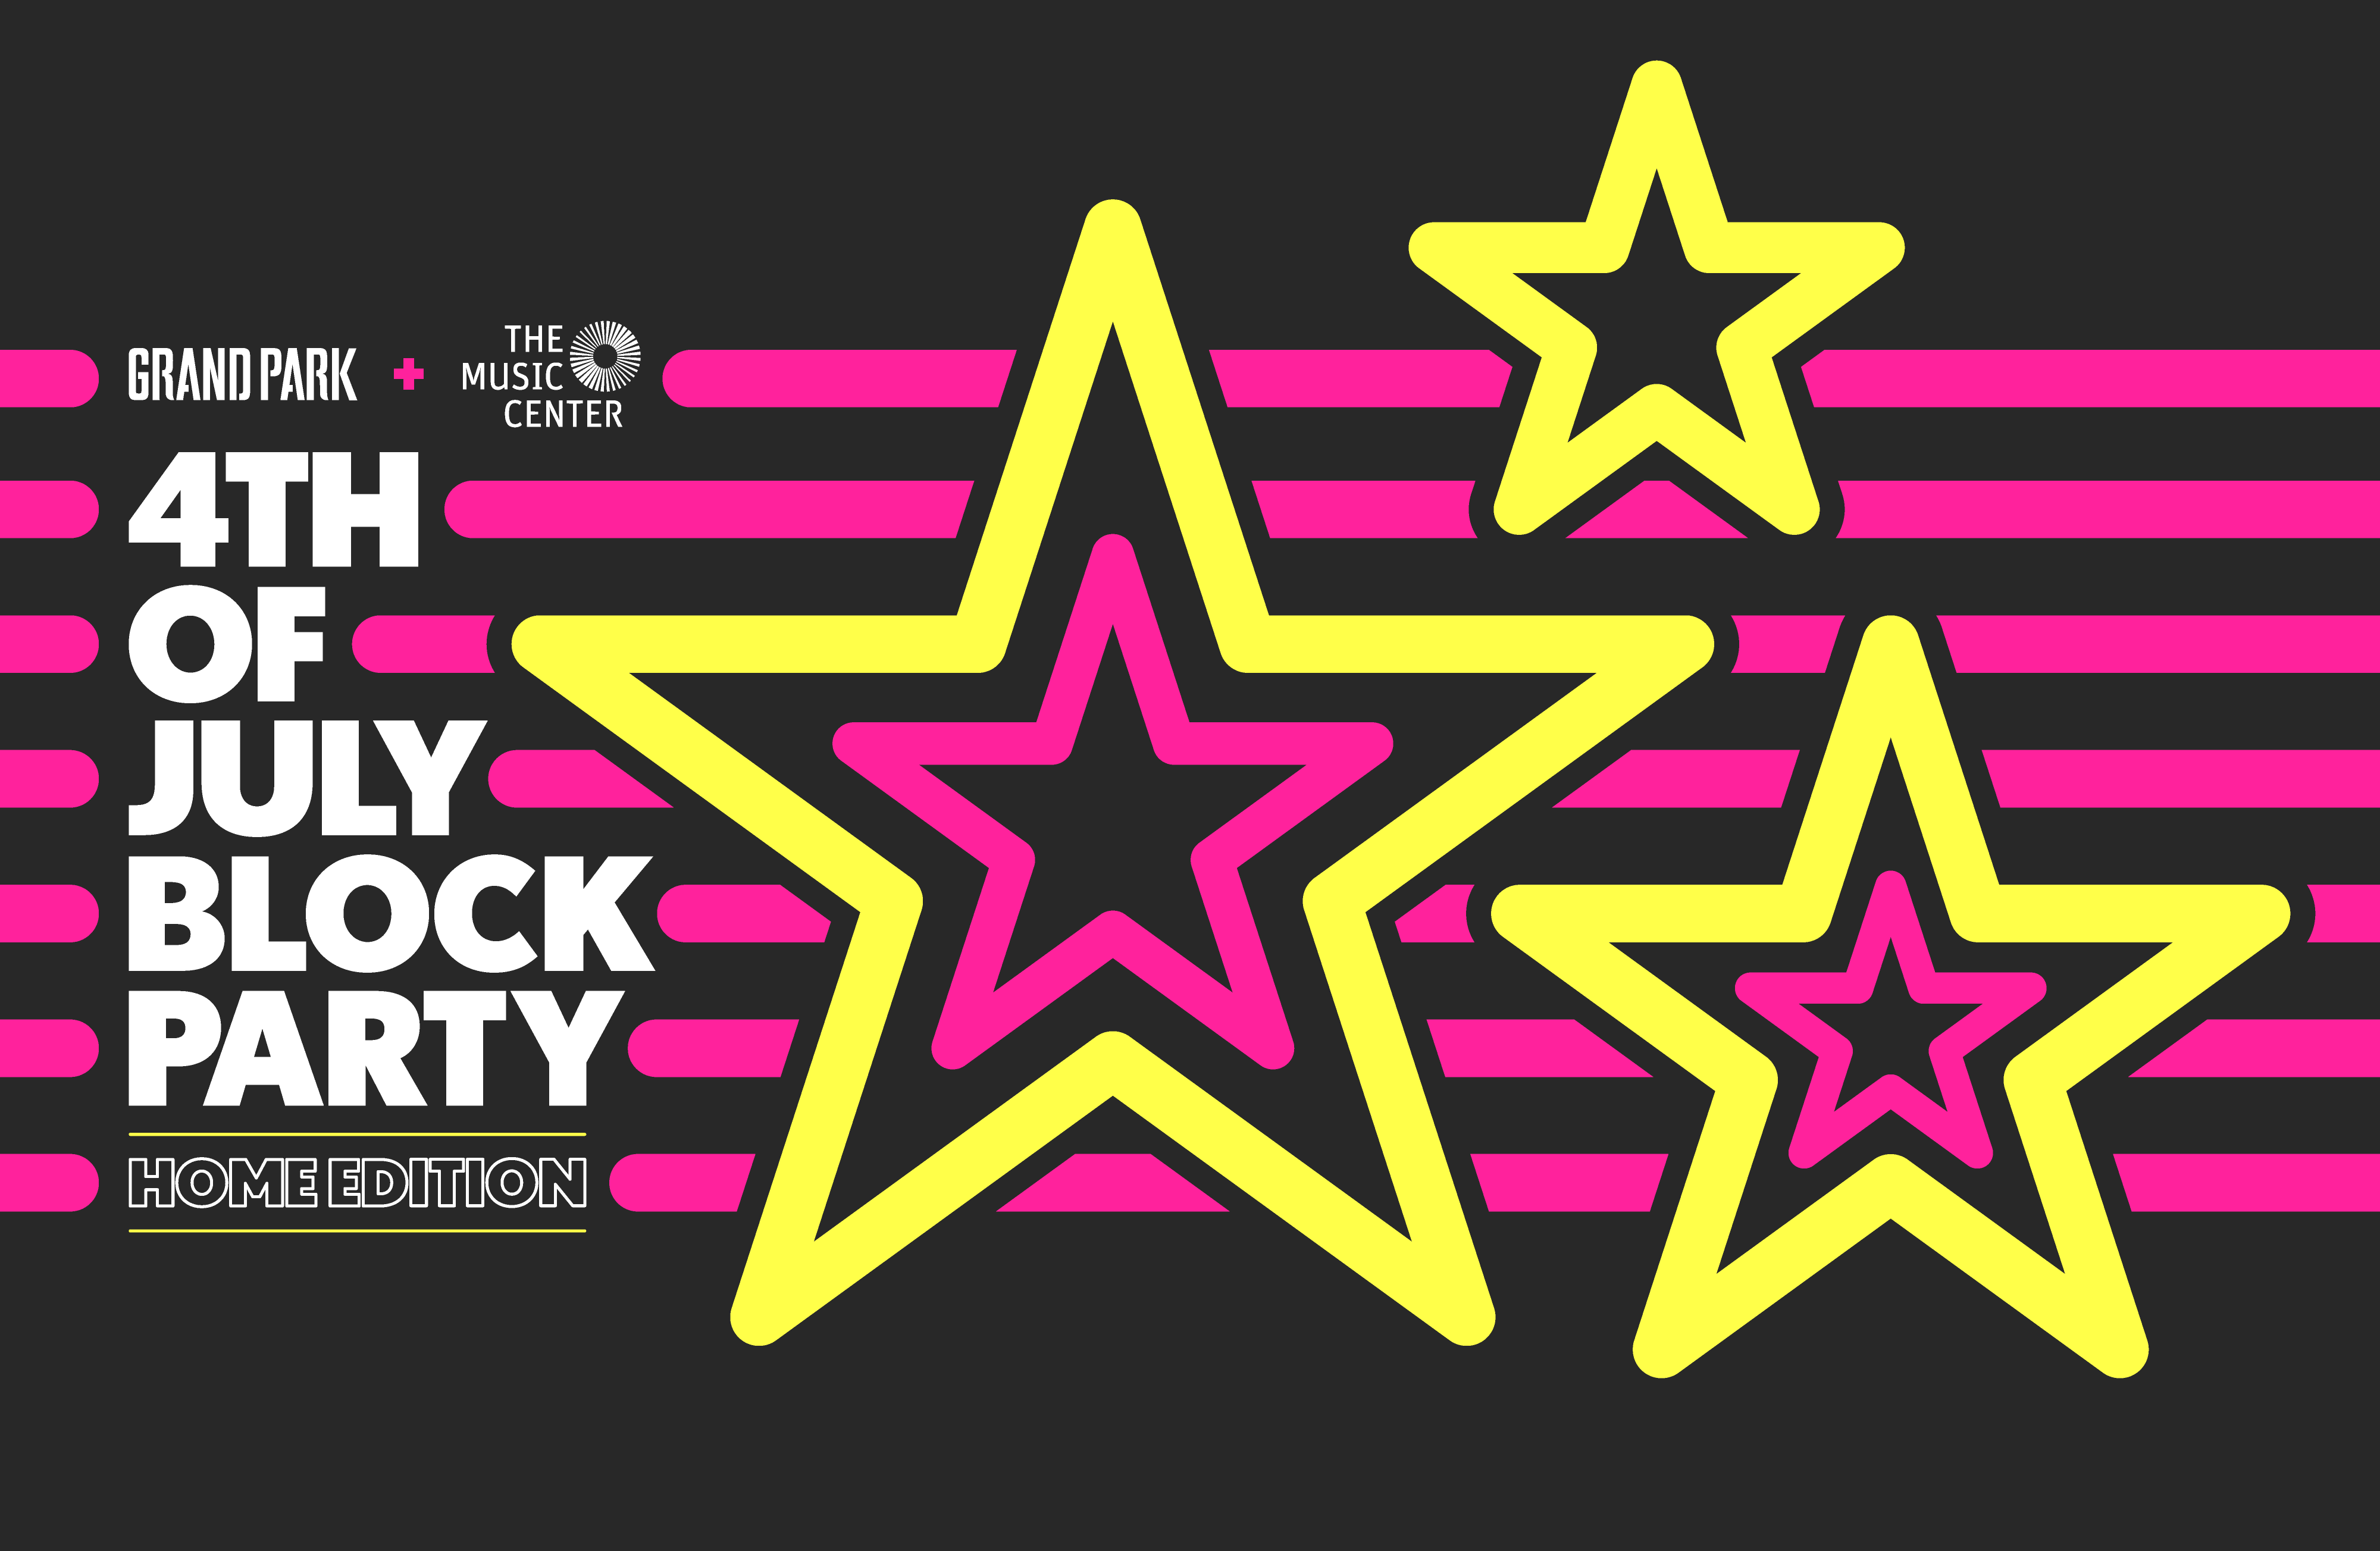 4th of July Block Party, 2020. Home Edition. Grand Park + The Music Center